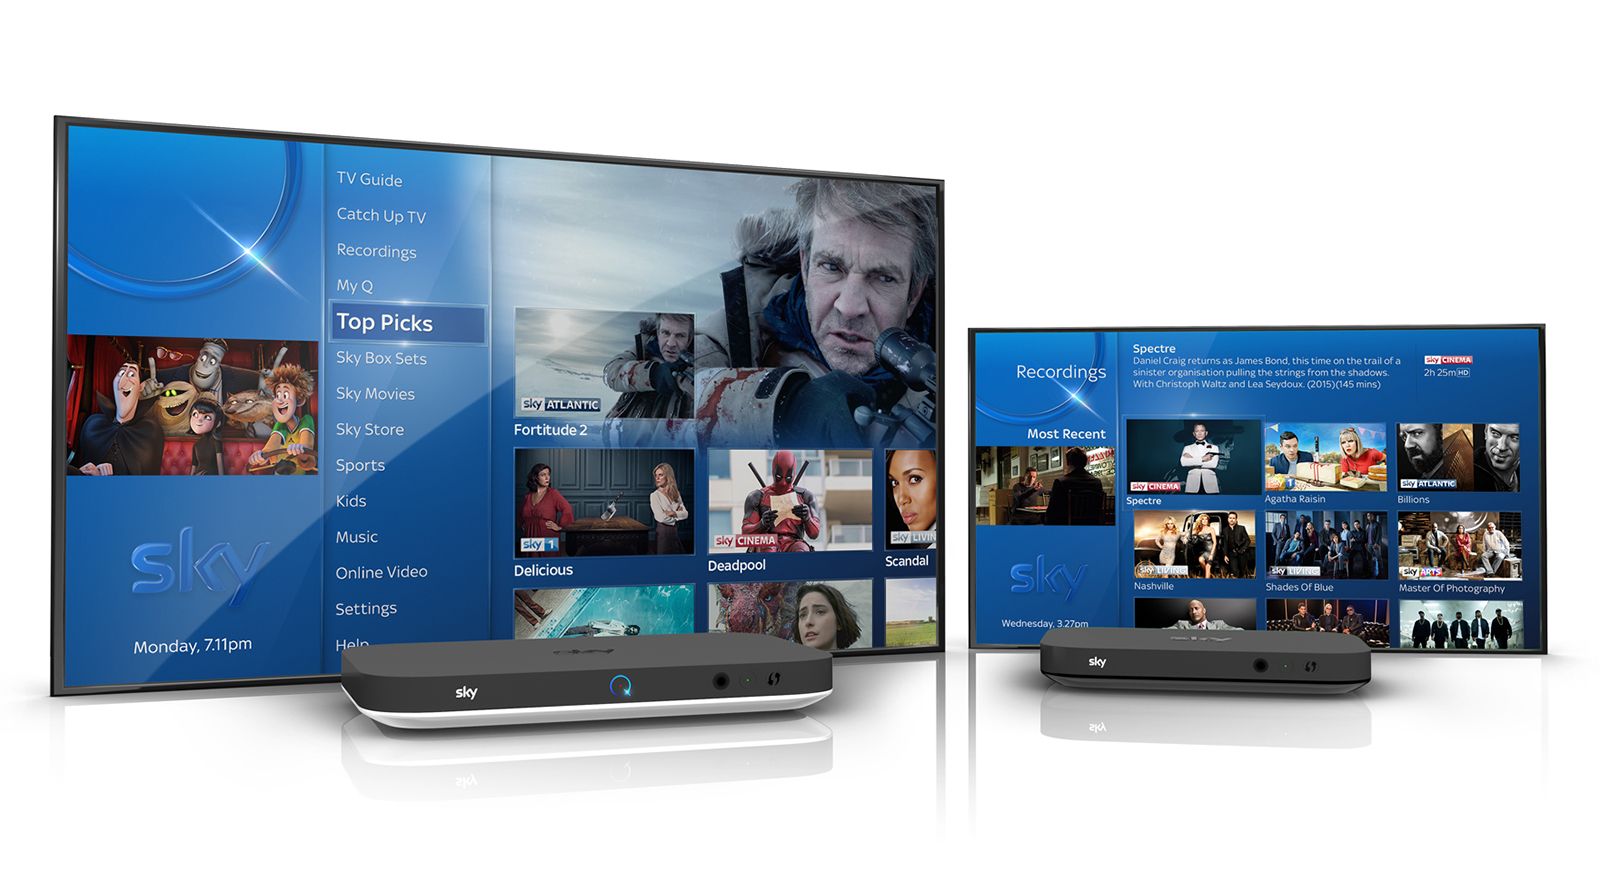 sky q coming for those without a satellite dish full service over broadband image 1